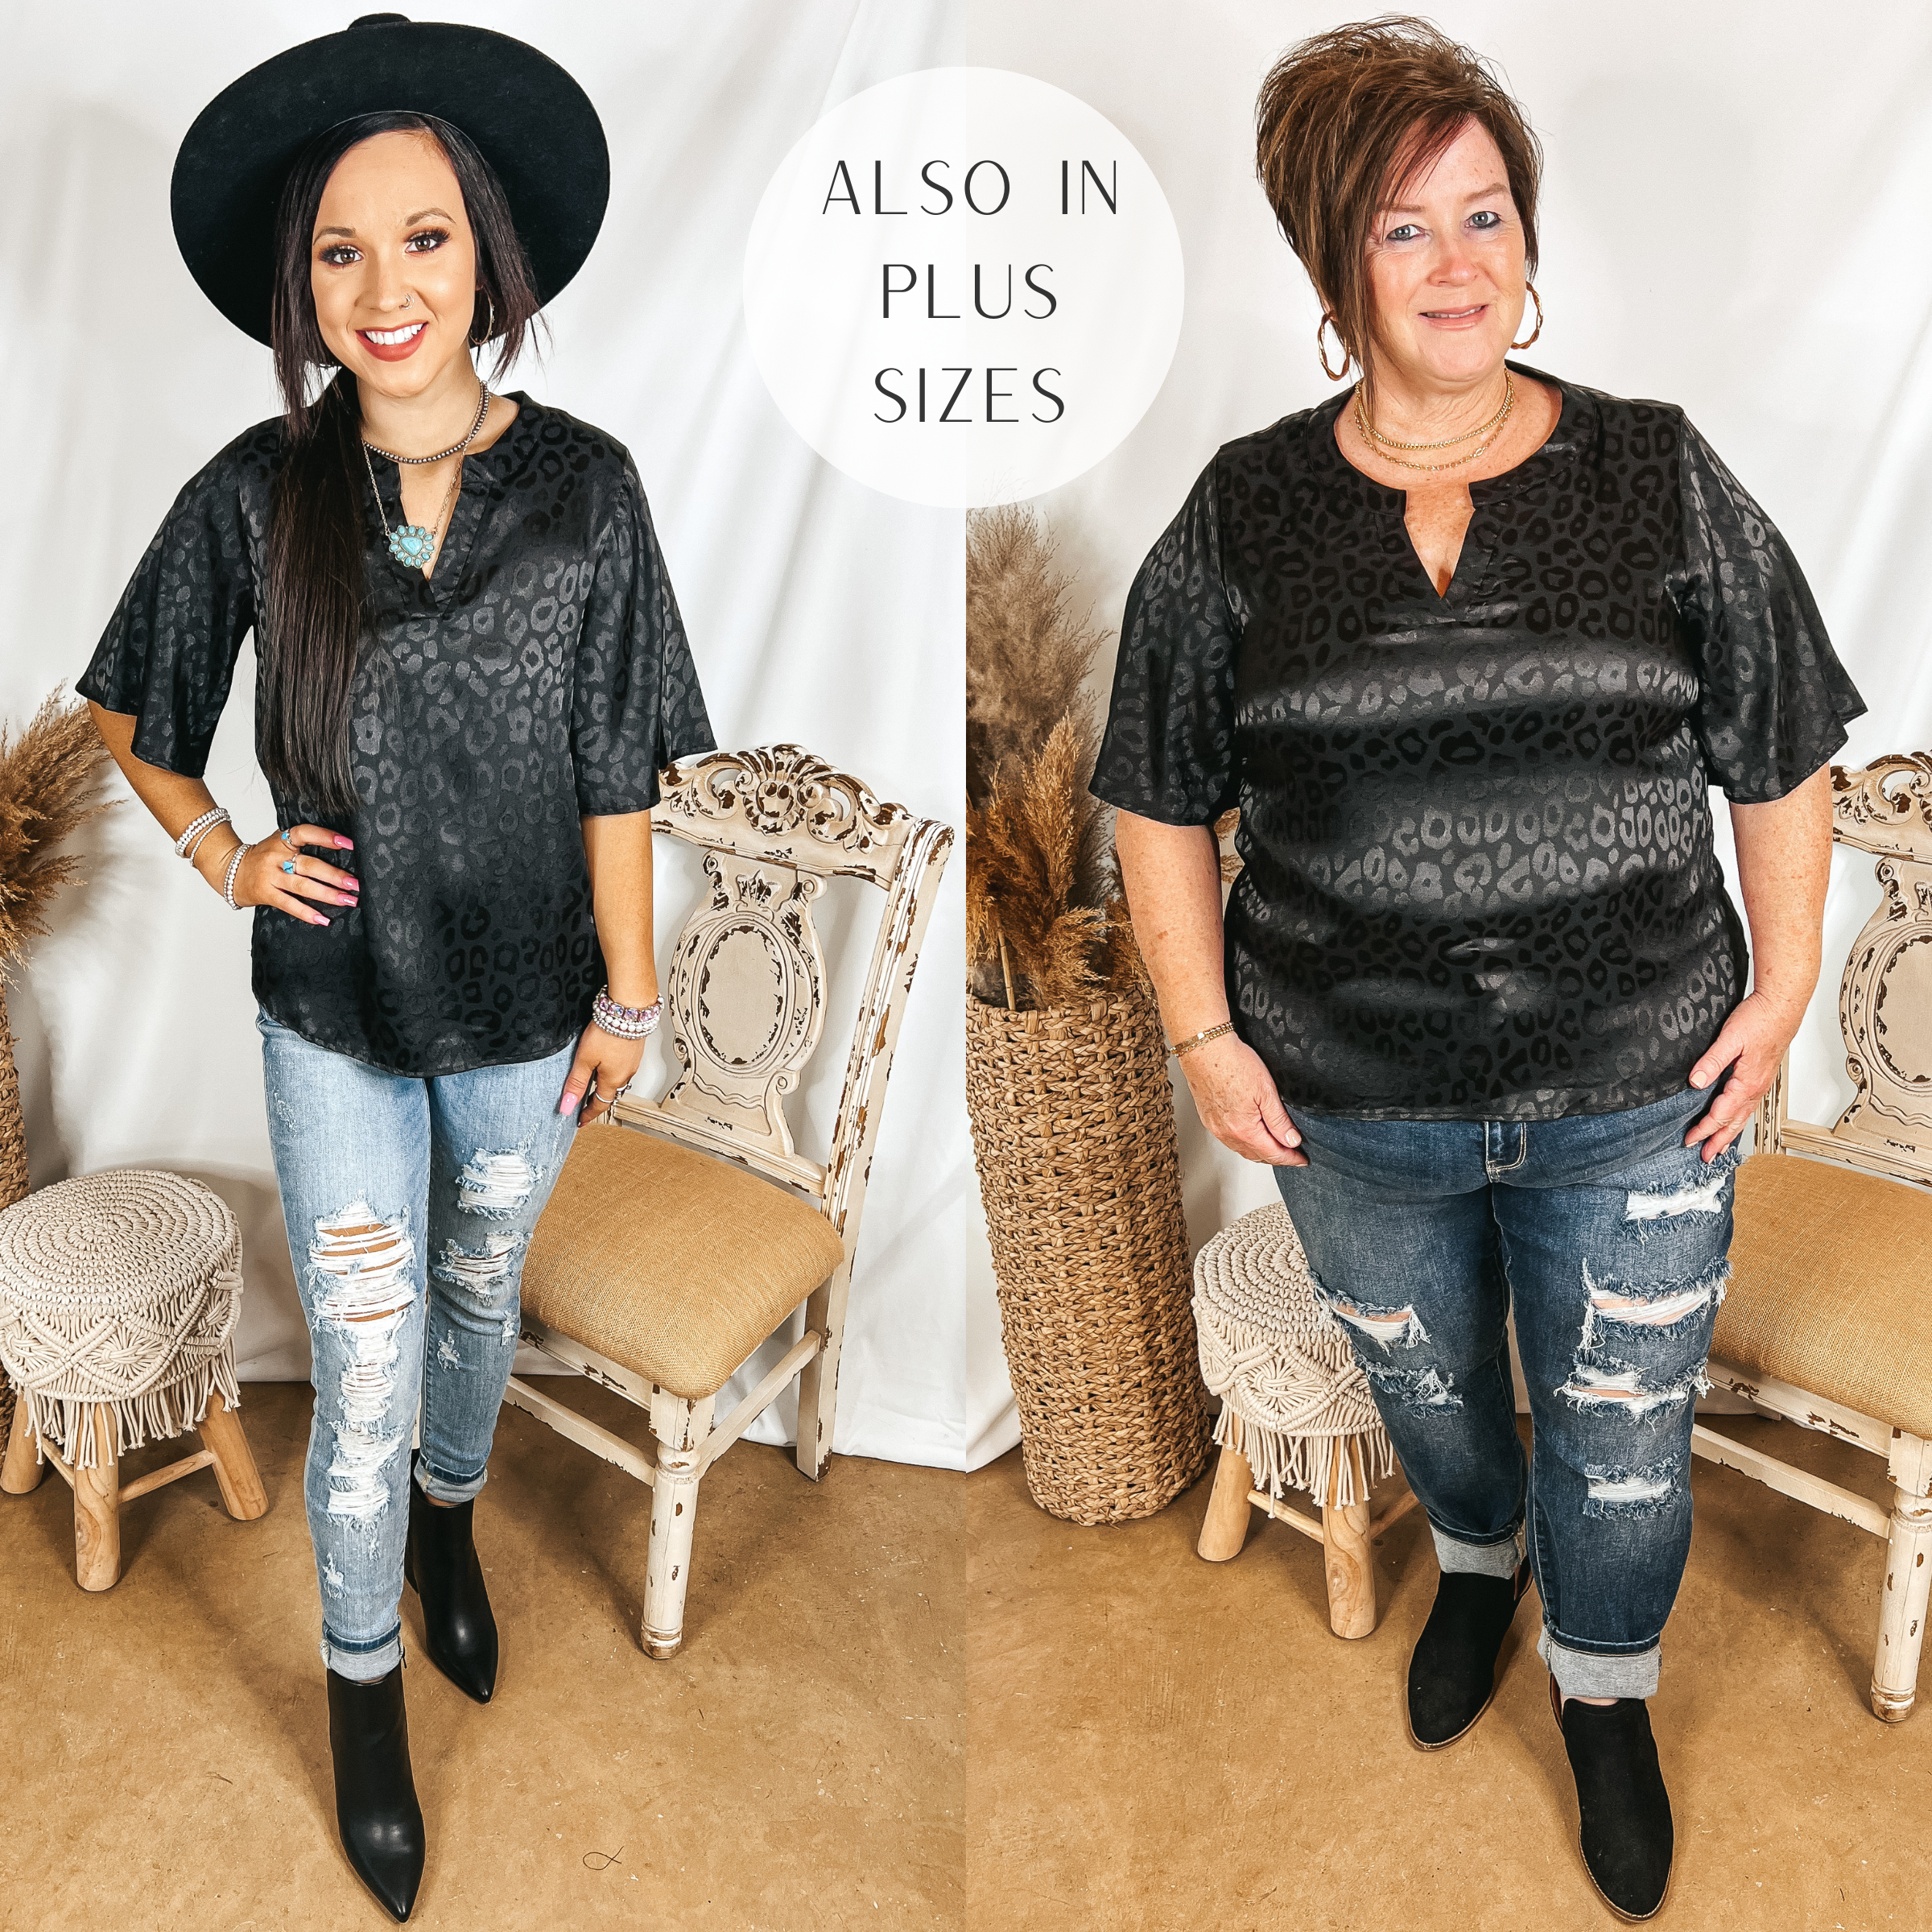 Models are wearing a black satin top that has a black leopard print. Size small model has it paired with light wash distressed jeans, black booties, and a black hat. Plus size model has it paired with dark wash distressed jeans, black booties, and gold jewelry.